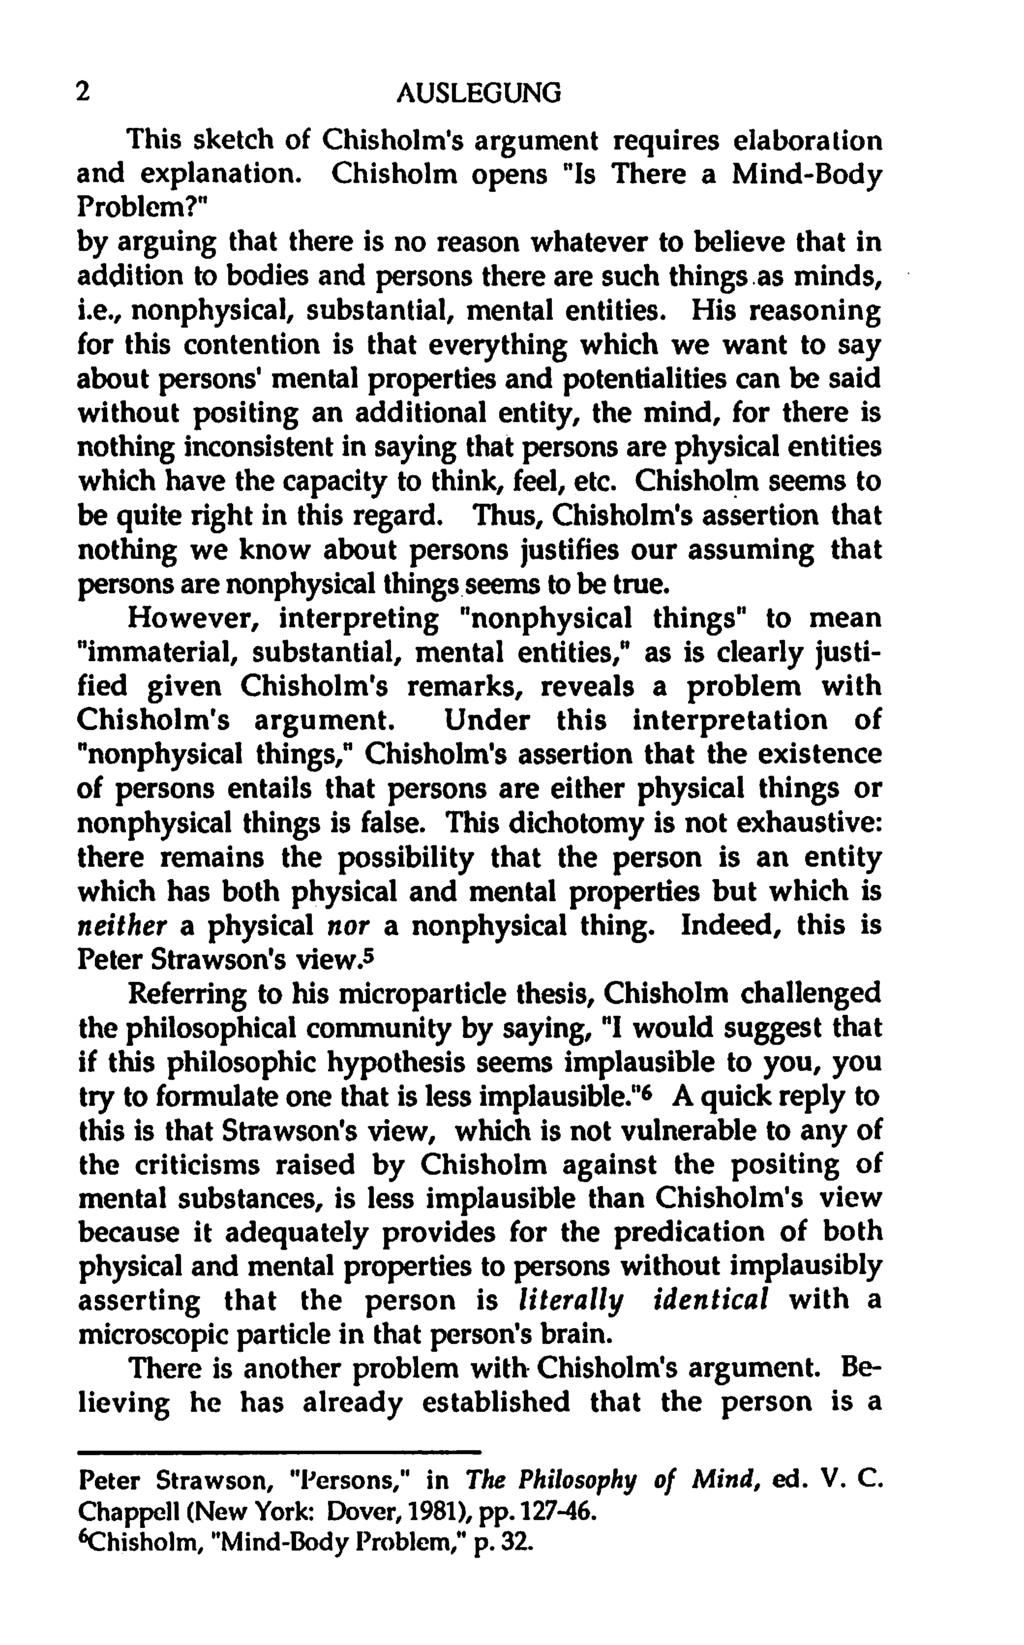 2 AUSLEGUNG This sketch of Chisholm's argument requires elaboration and explanation. Chisholm opens "Is There a Mind-Body Problem?